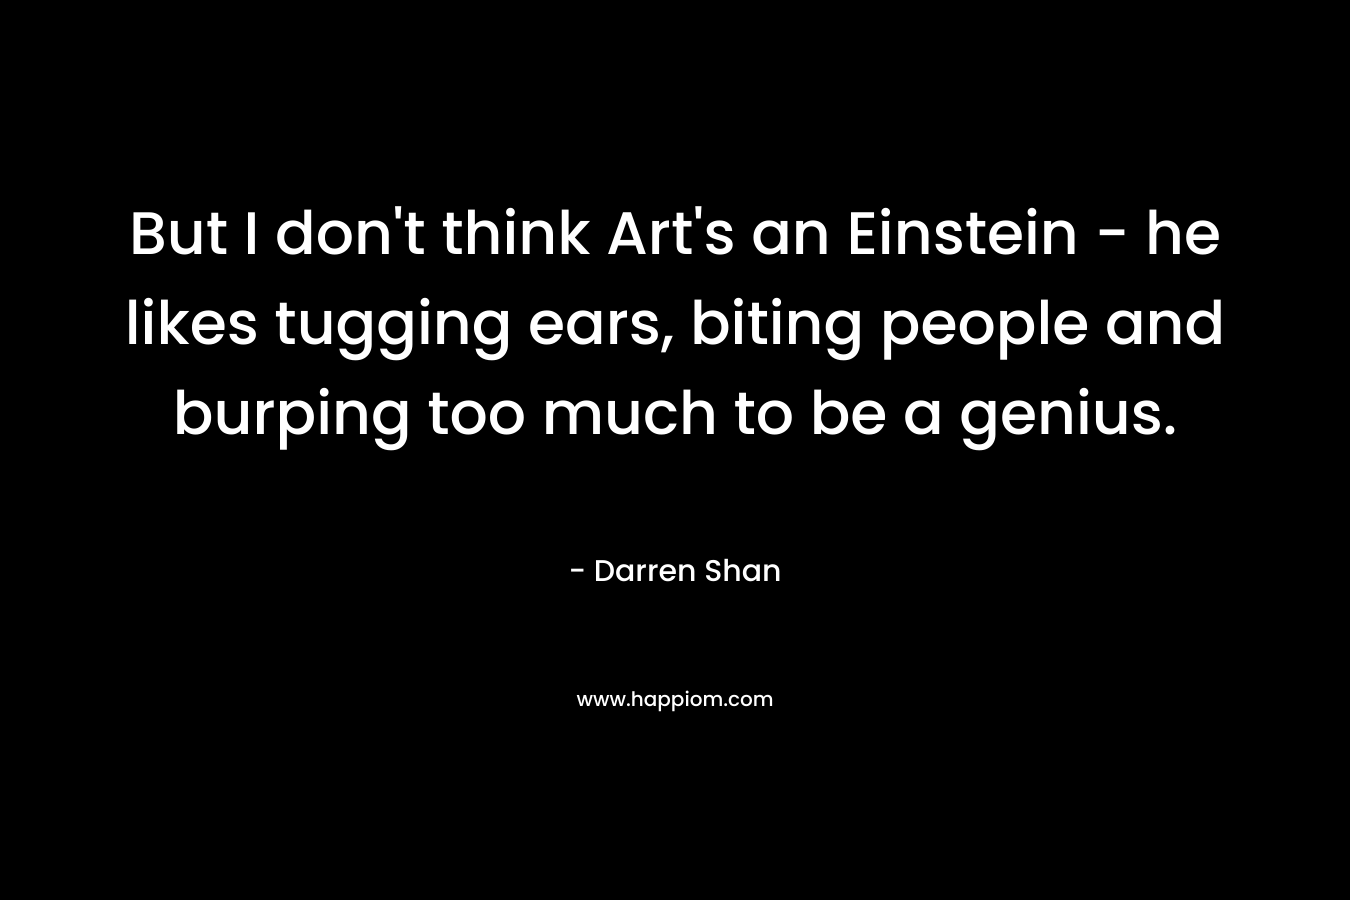 But I don't think Art's an Einstein - he likes tugging ears, biting people and burping too much to be a genius.